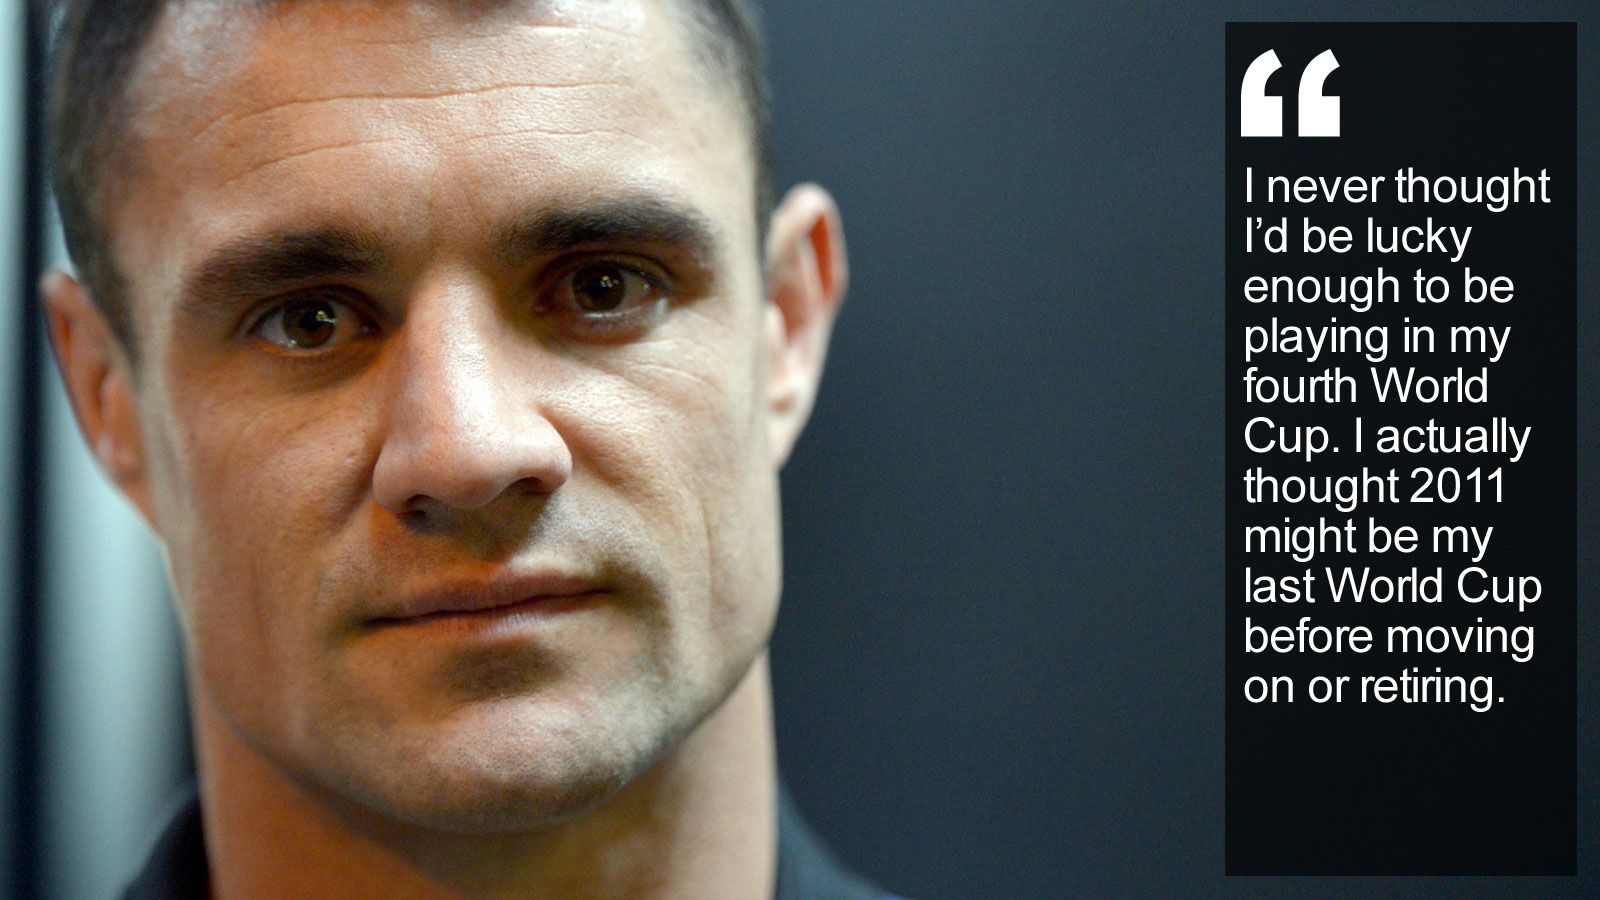 Dan Carter reveals who he rates as the world's best ahead of World